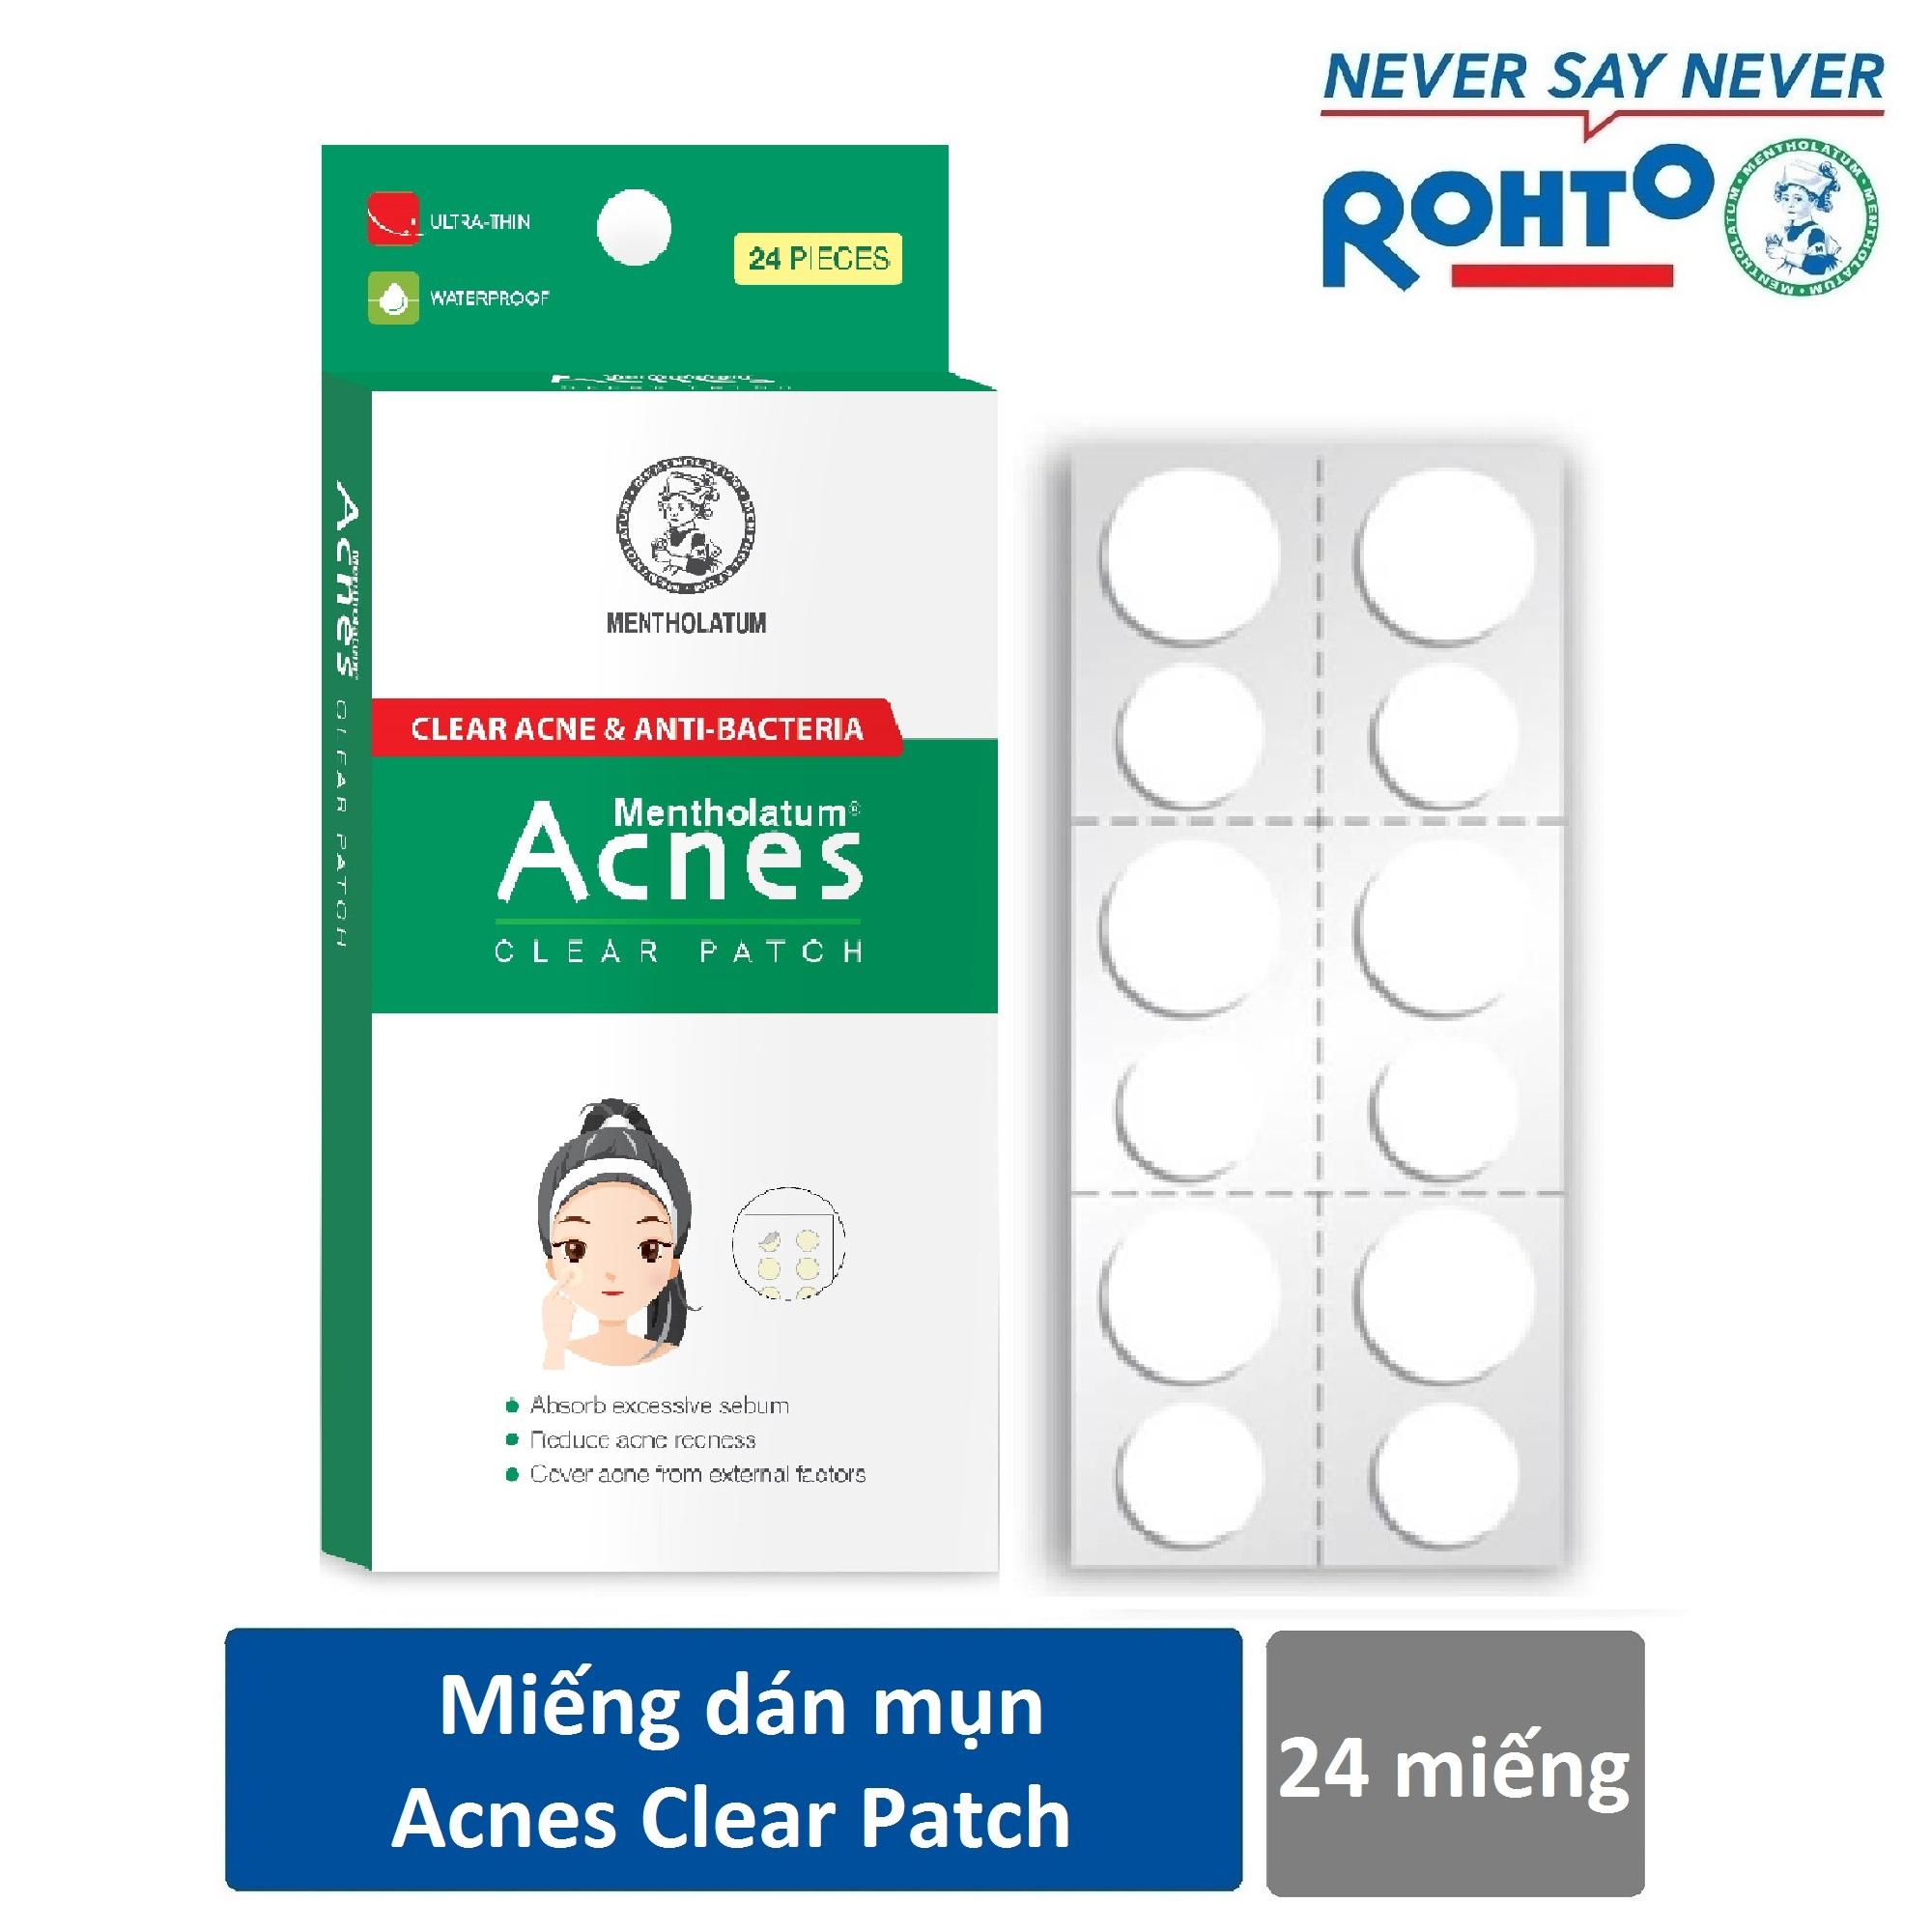 Miếng dán mụn Acnes Clear Patch (24 miếng)